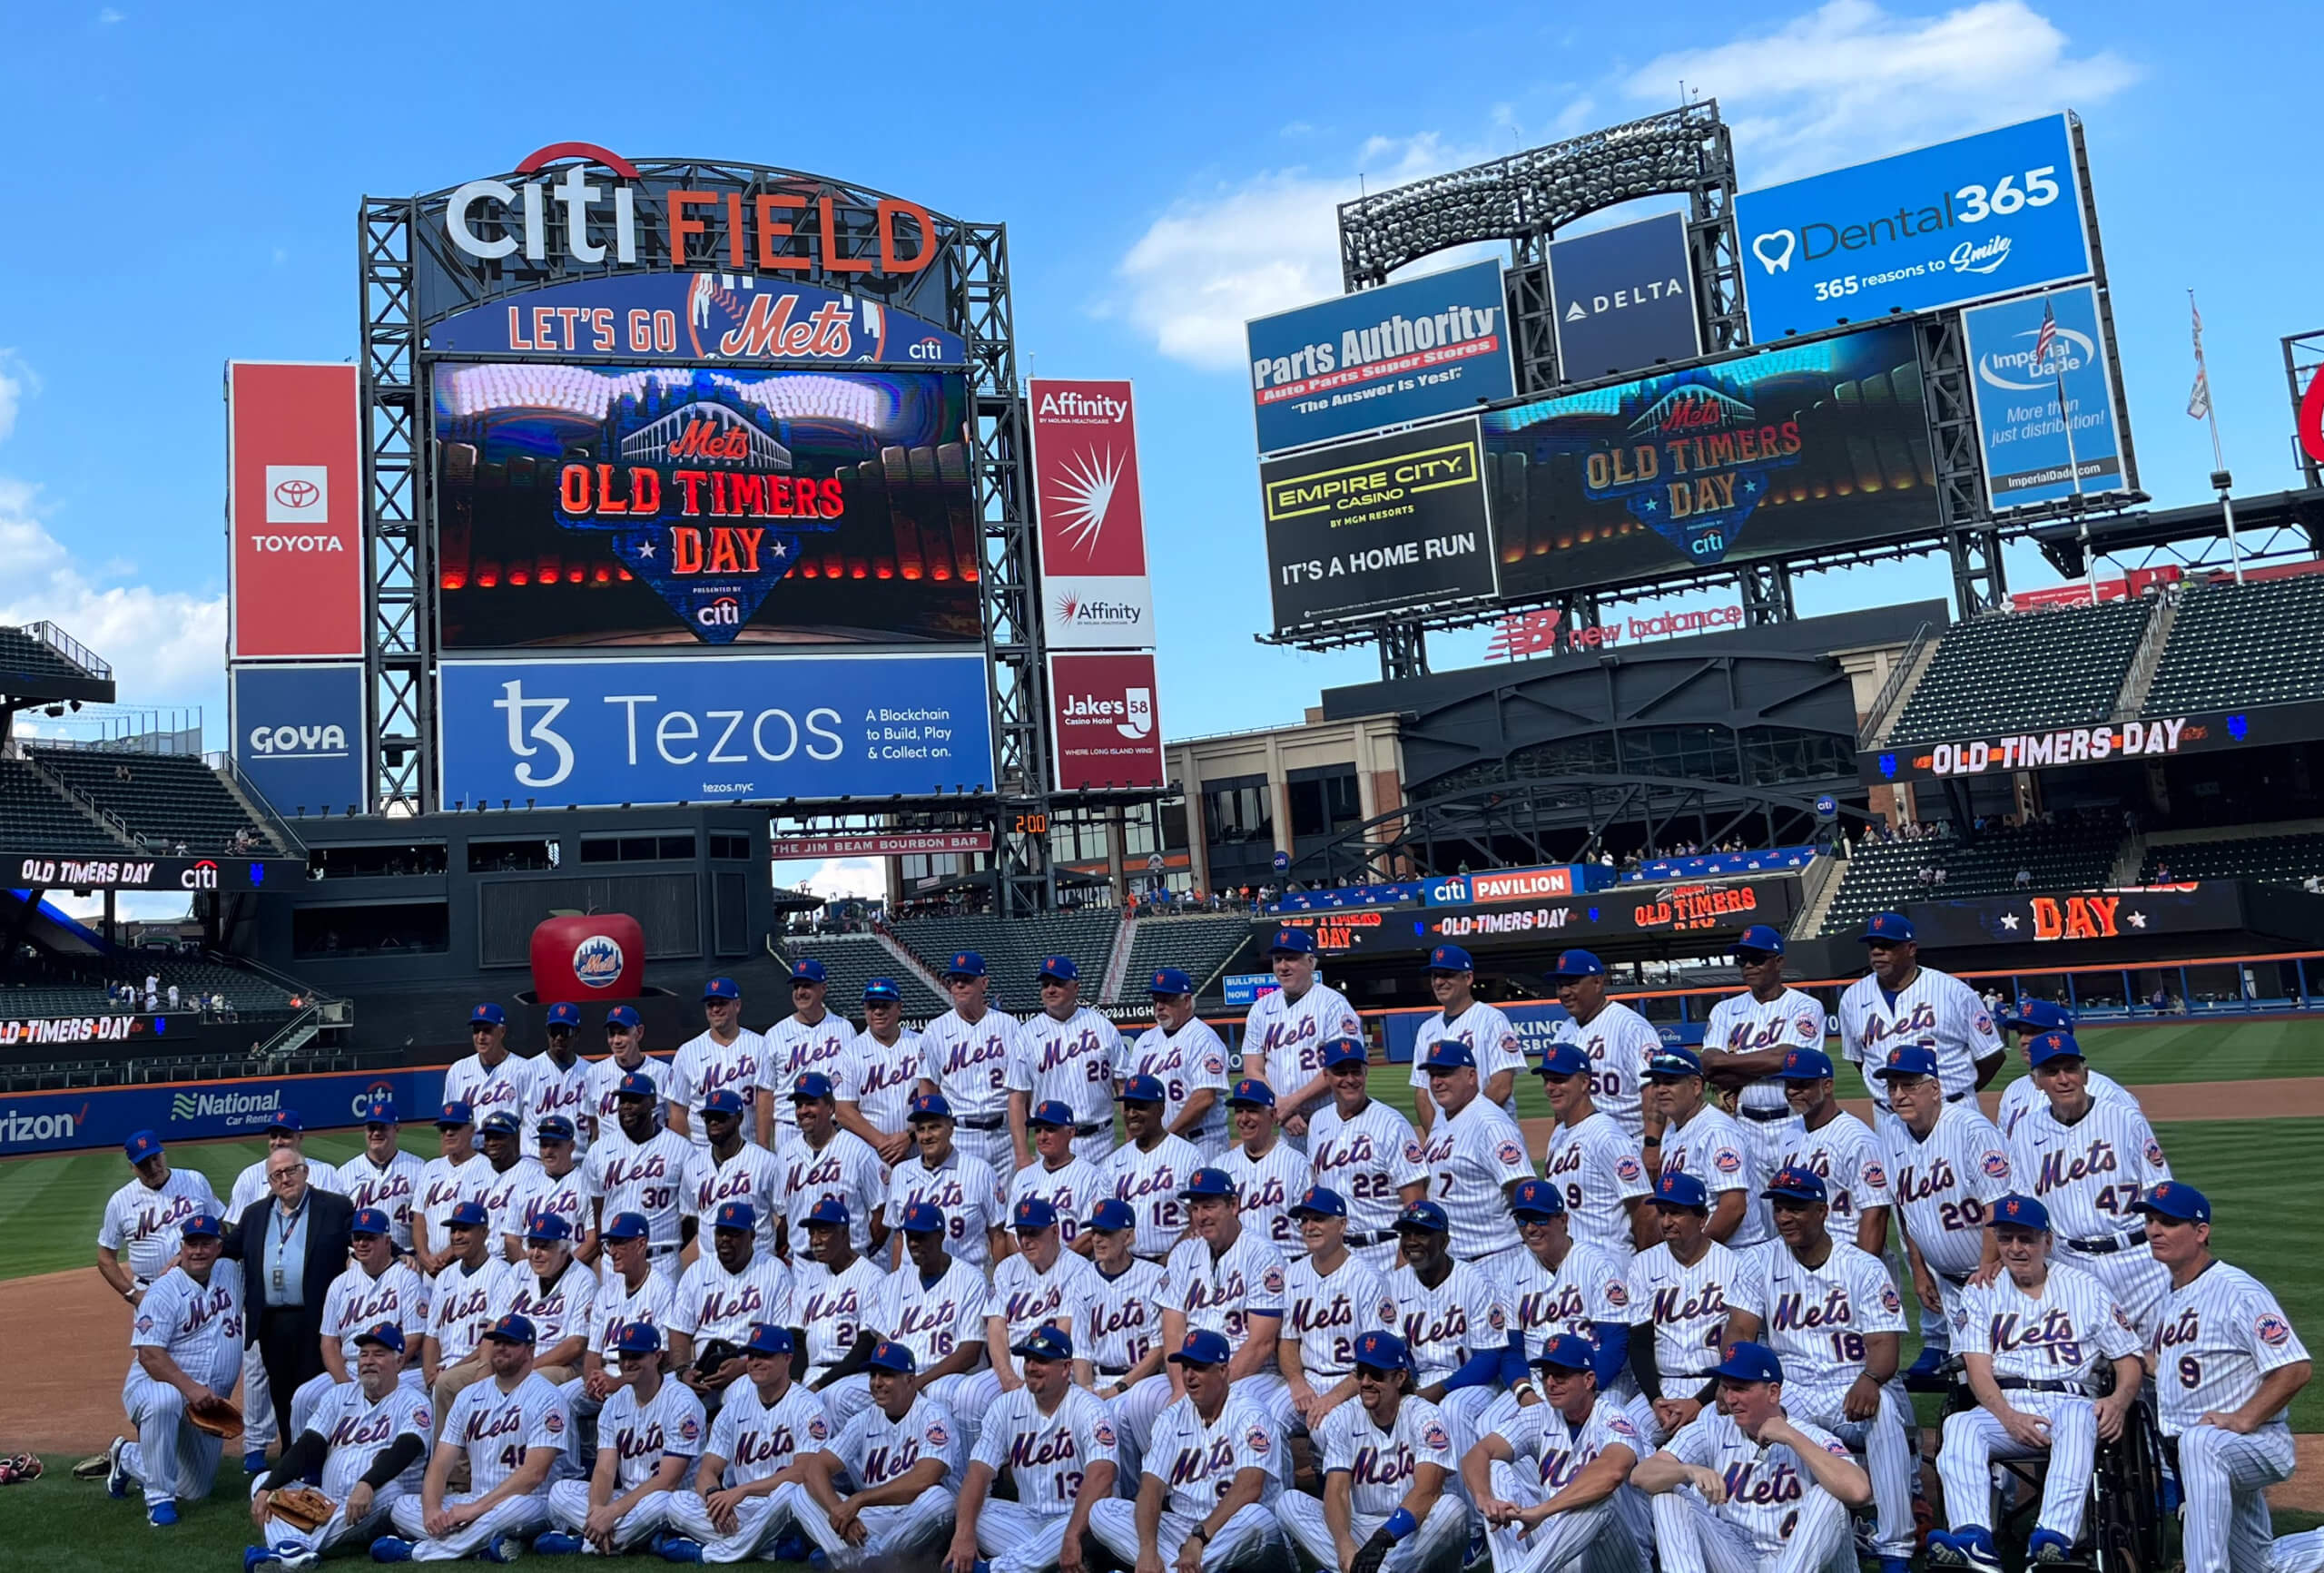 Turning back the clock: A look at the Mets' last Old-Timers' Day in